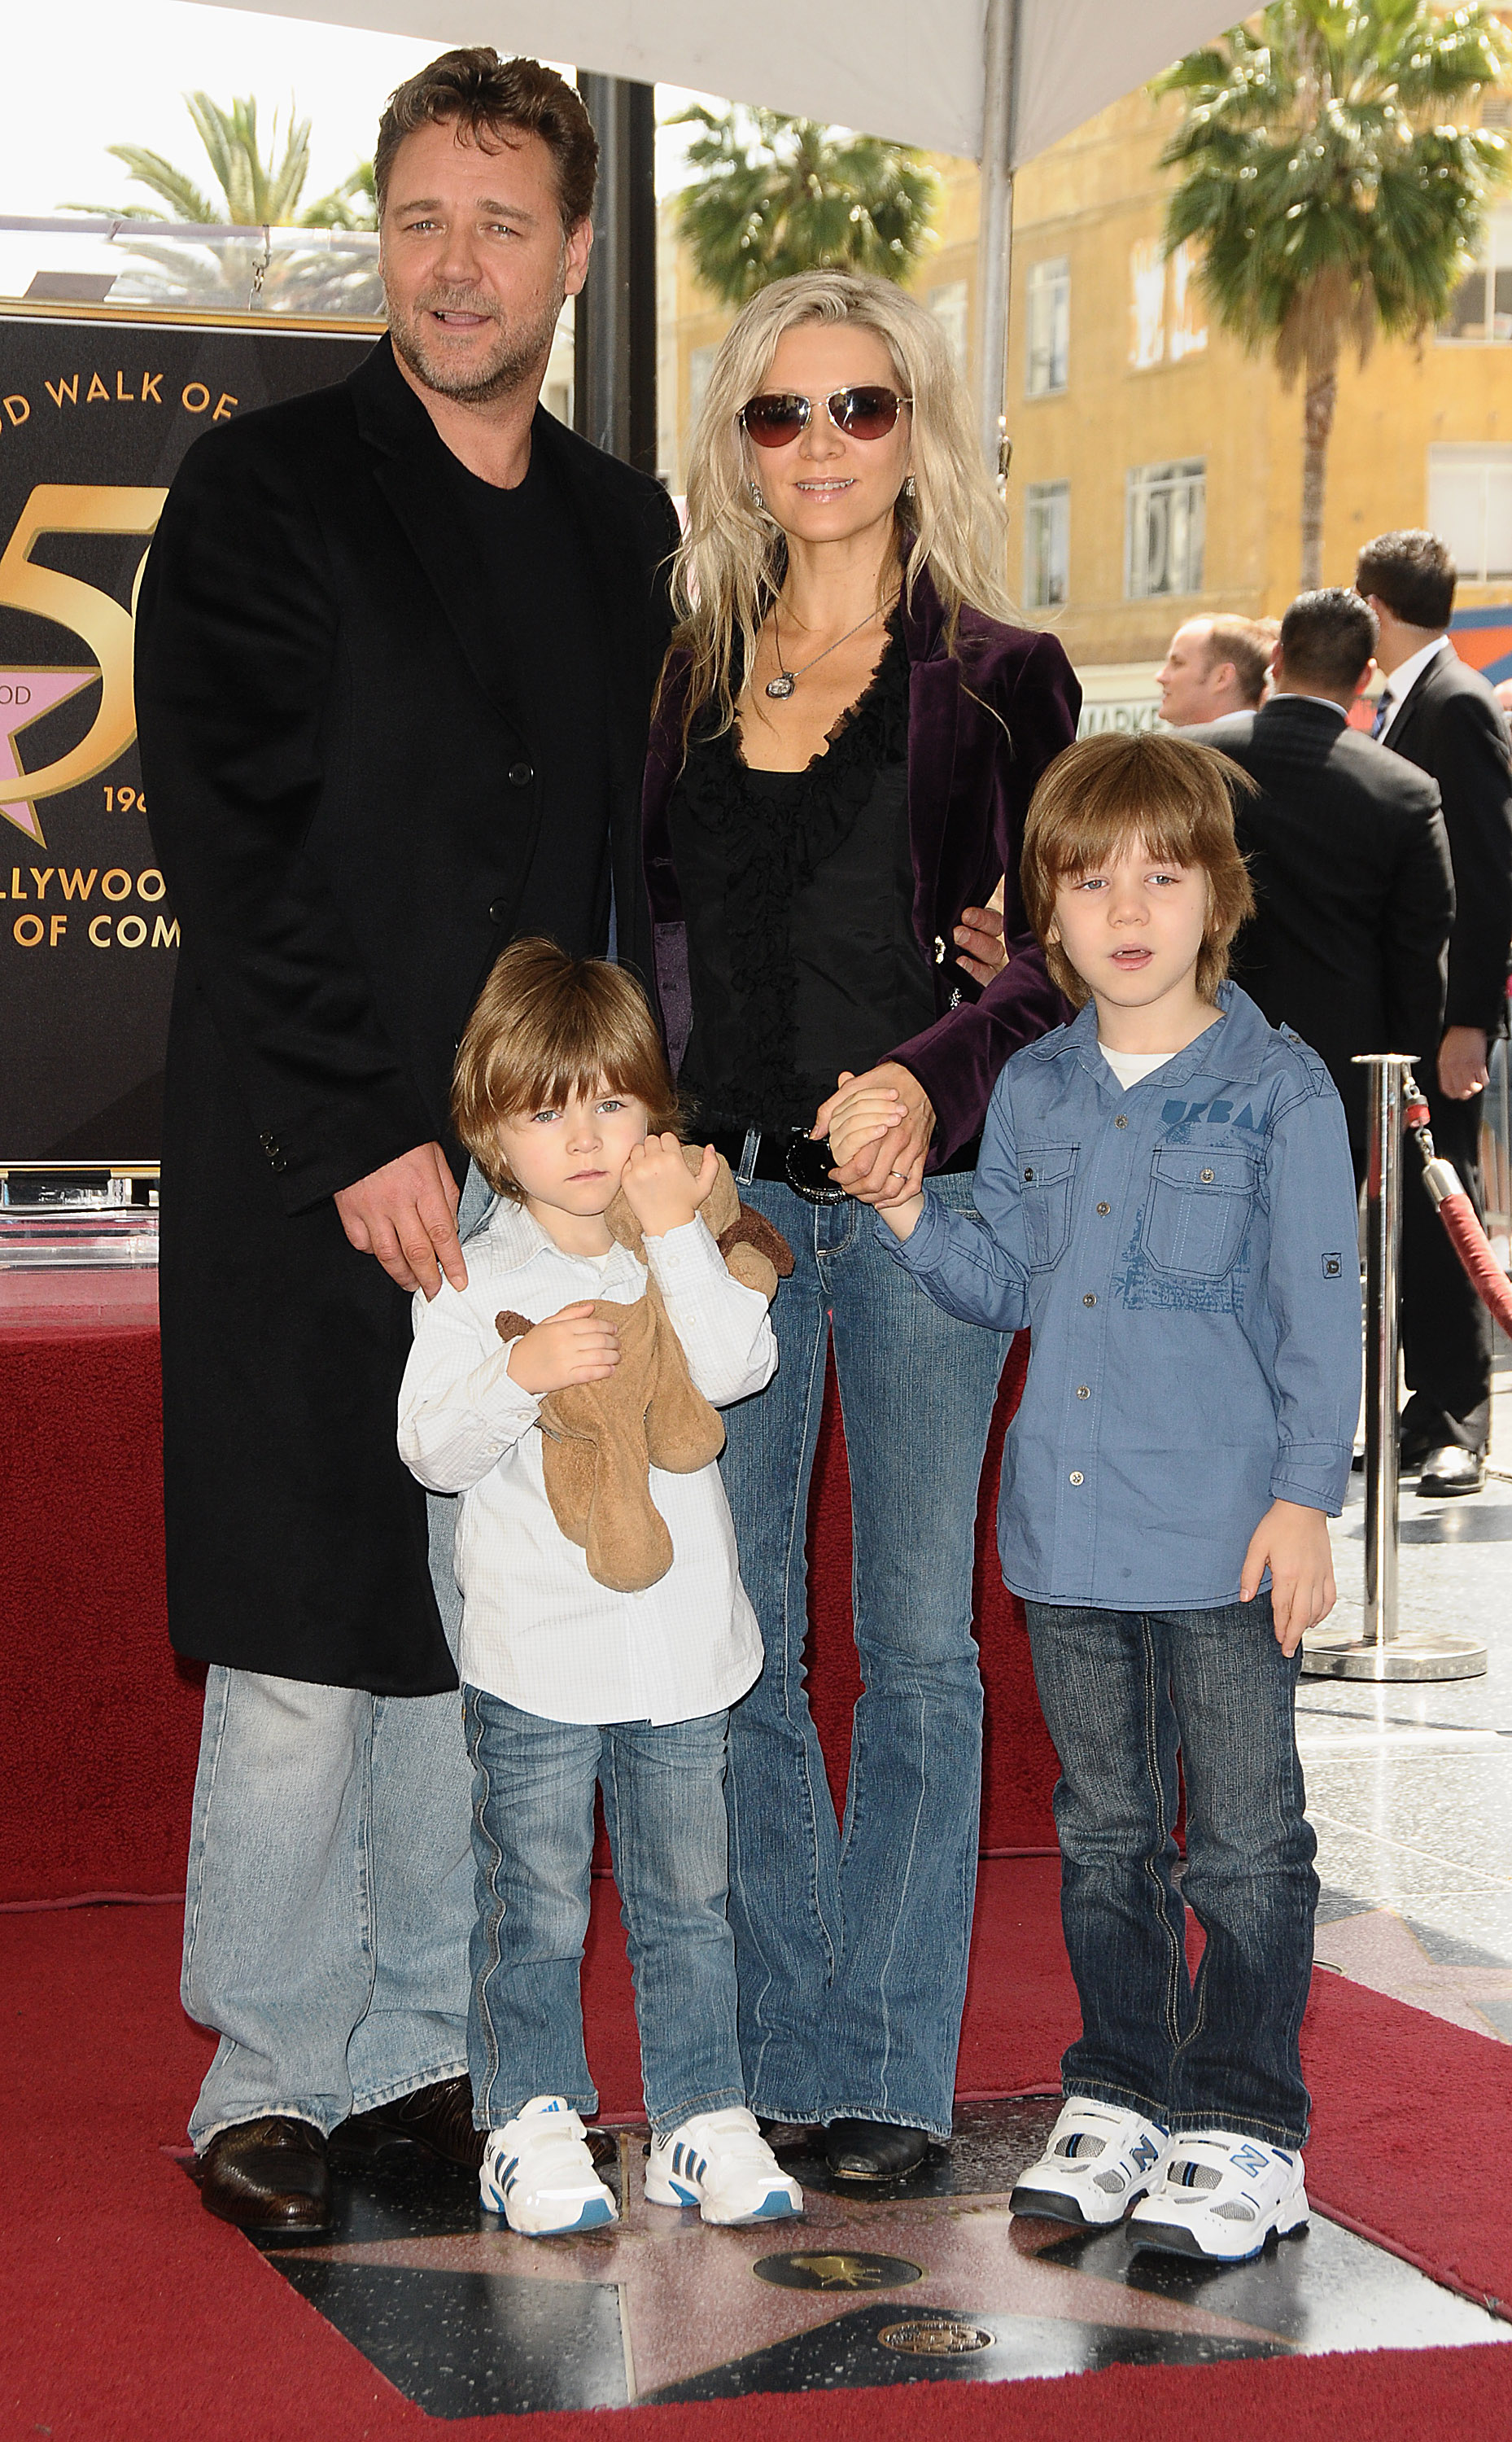 <p>Russell Crowe and singer-actress wife Danielle Spencer -- who split in 2012 and divorced in 2018 -- brought sons Tennyson, then 3, and Charles, then 6, to the Oscar winner's Hollywood Walk of Fame star ceremony on April 12, 2010. Keep reading to see his eldest as an adult...</p>